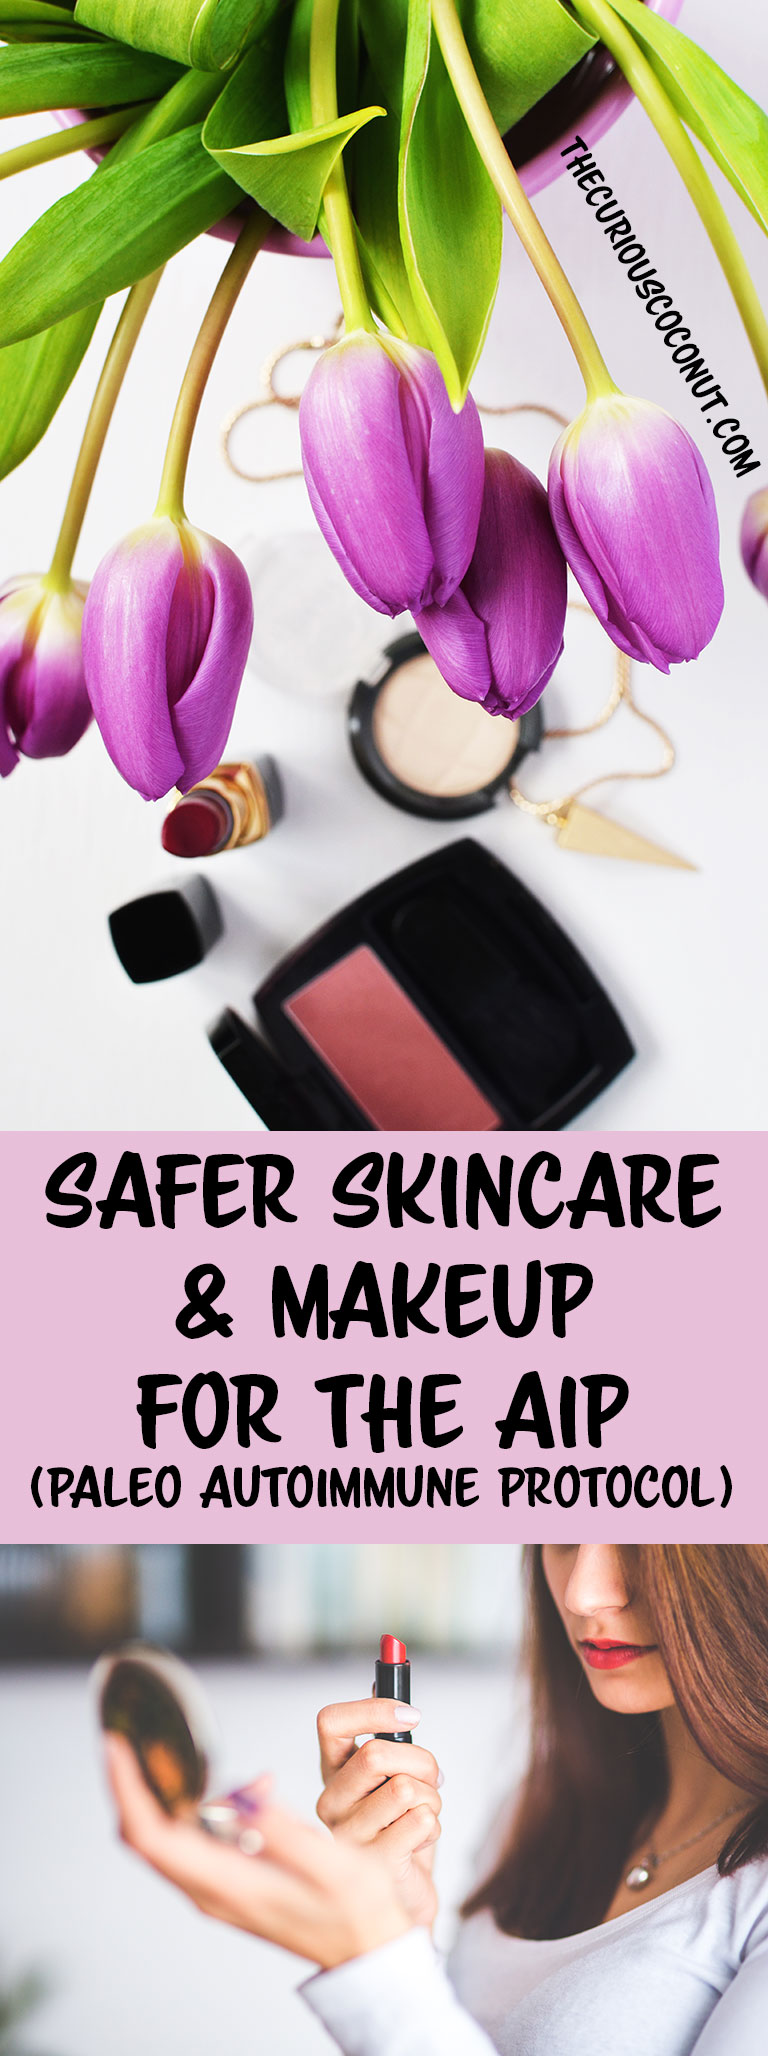 Safer Skincare and Makeup for the #AIP - my top picks!  // TheCuriousCoconut.com